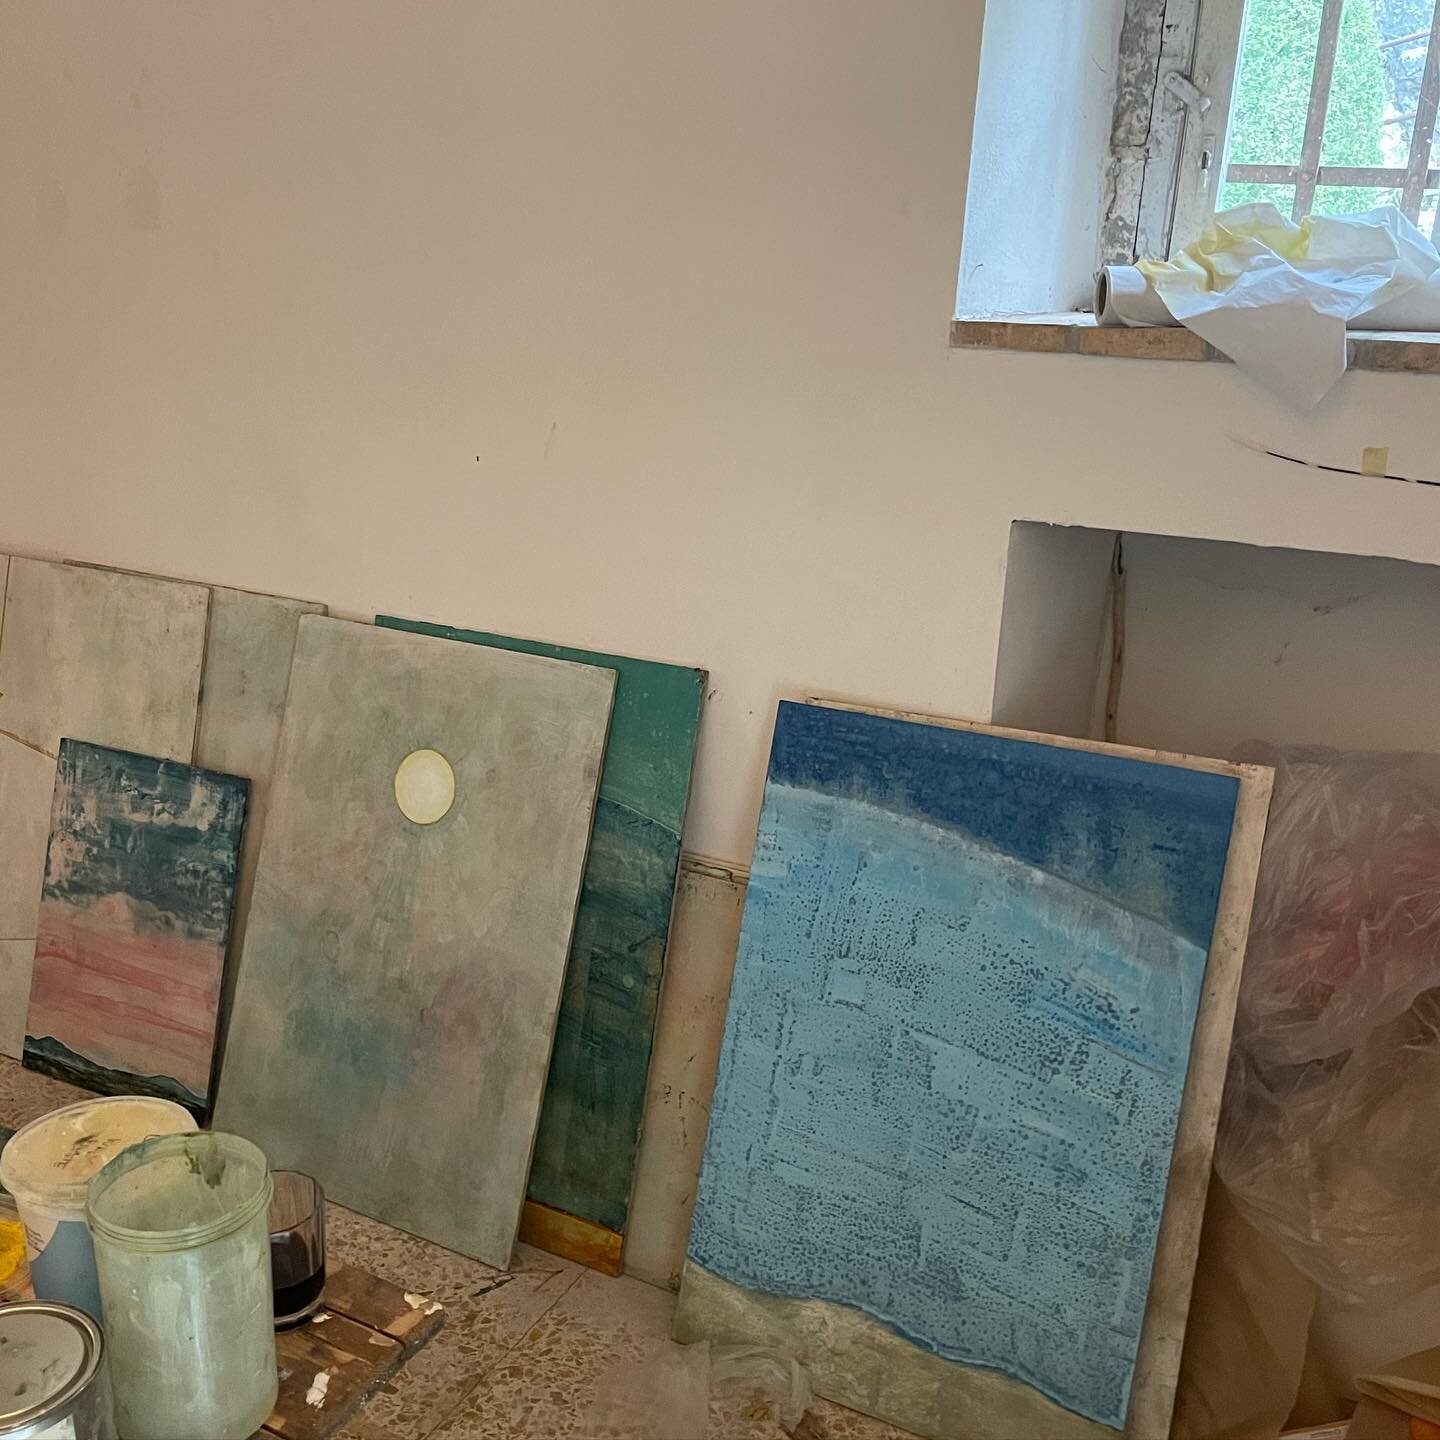 Harry Adams back at Monteluco. 5 days work at the Eremo making sketches and offerings for a show in Rome next year with #galleriaalessandrabonomo